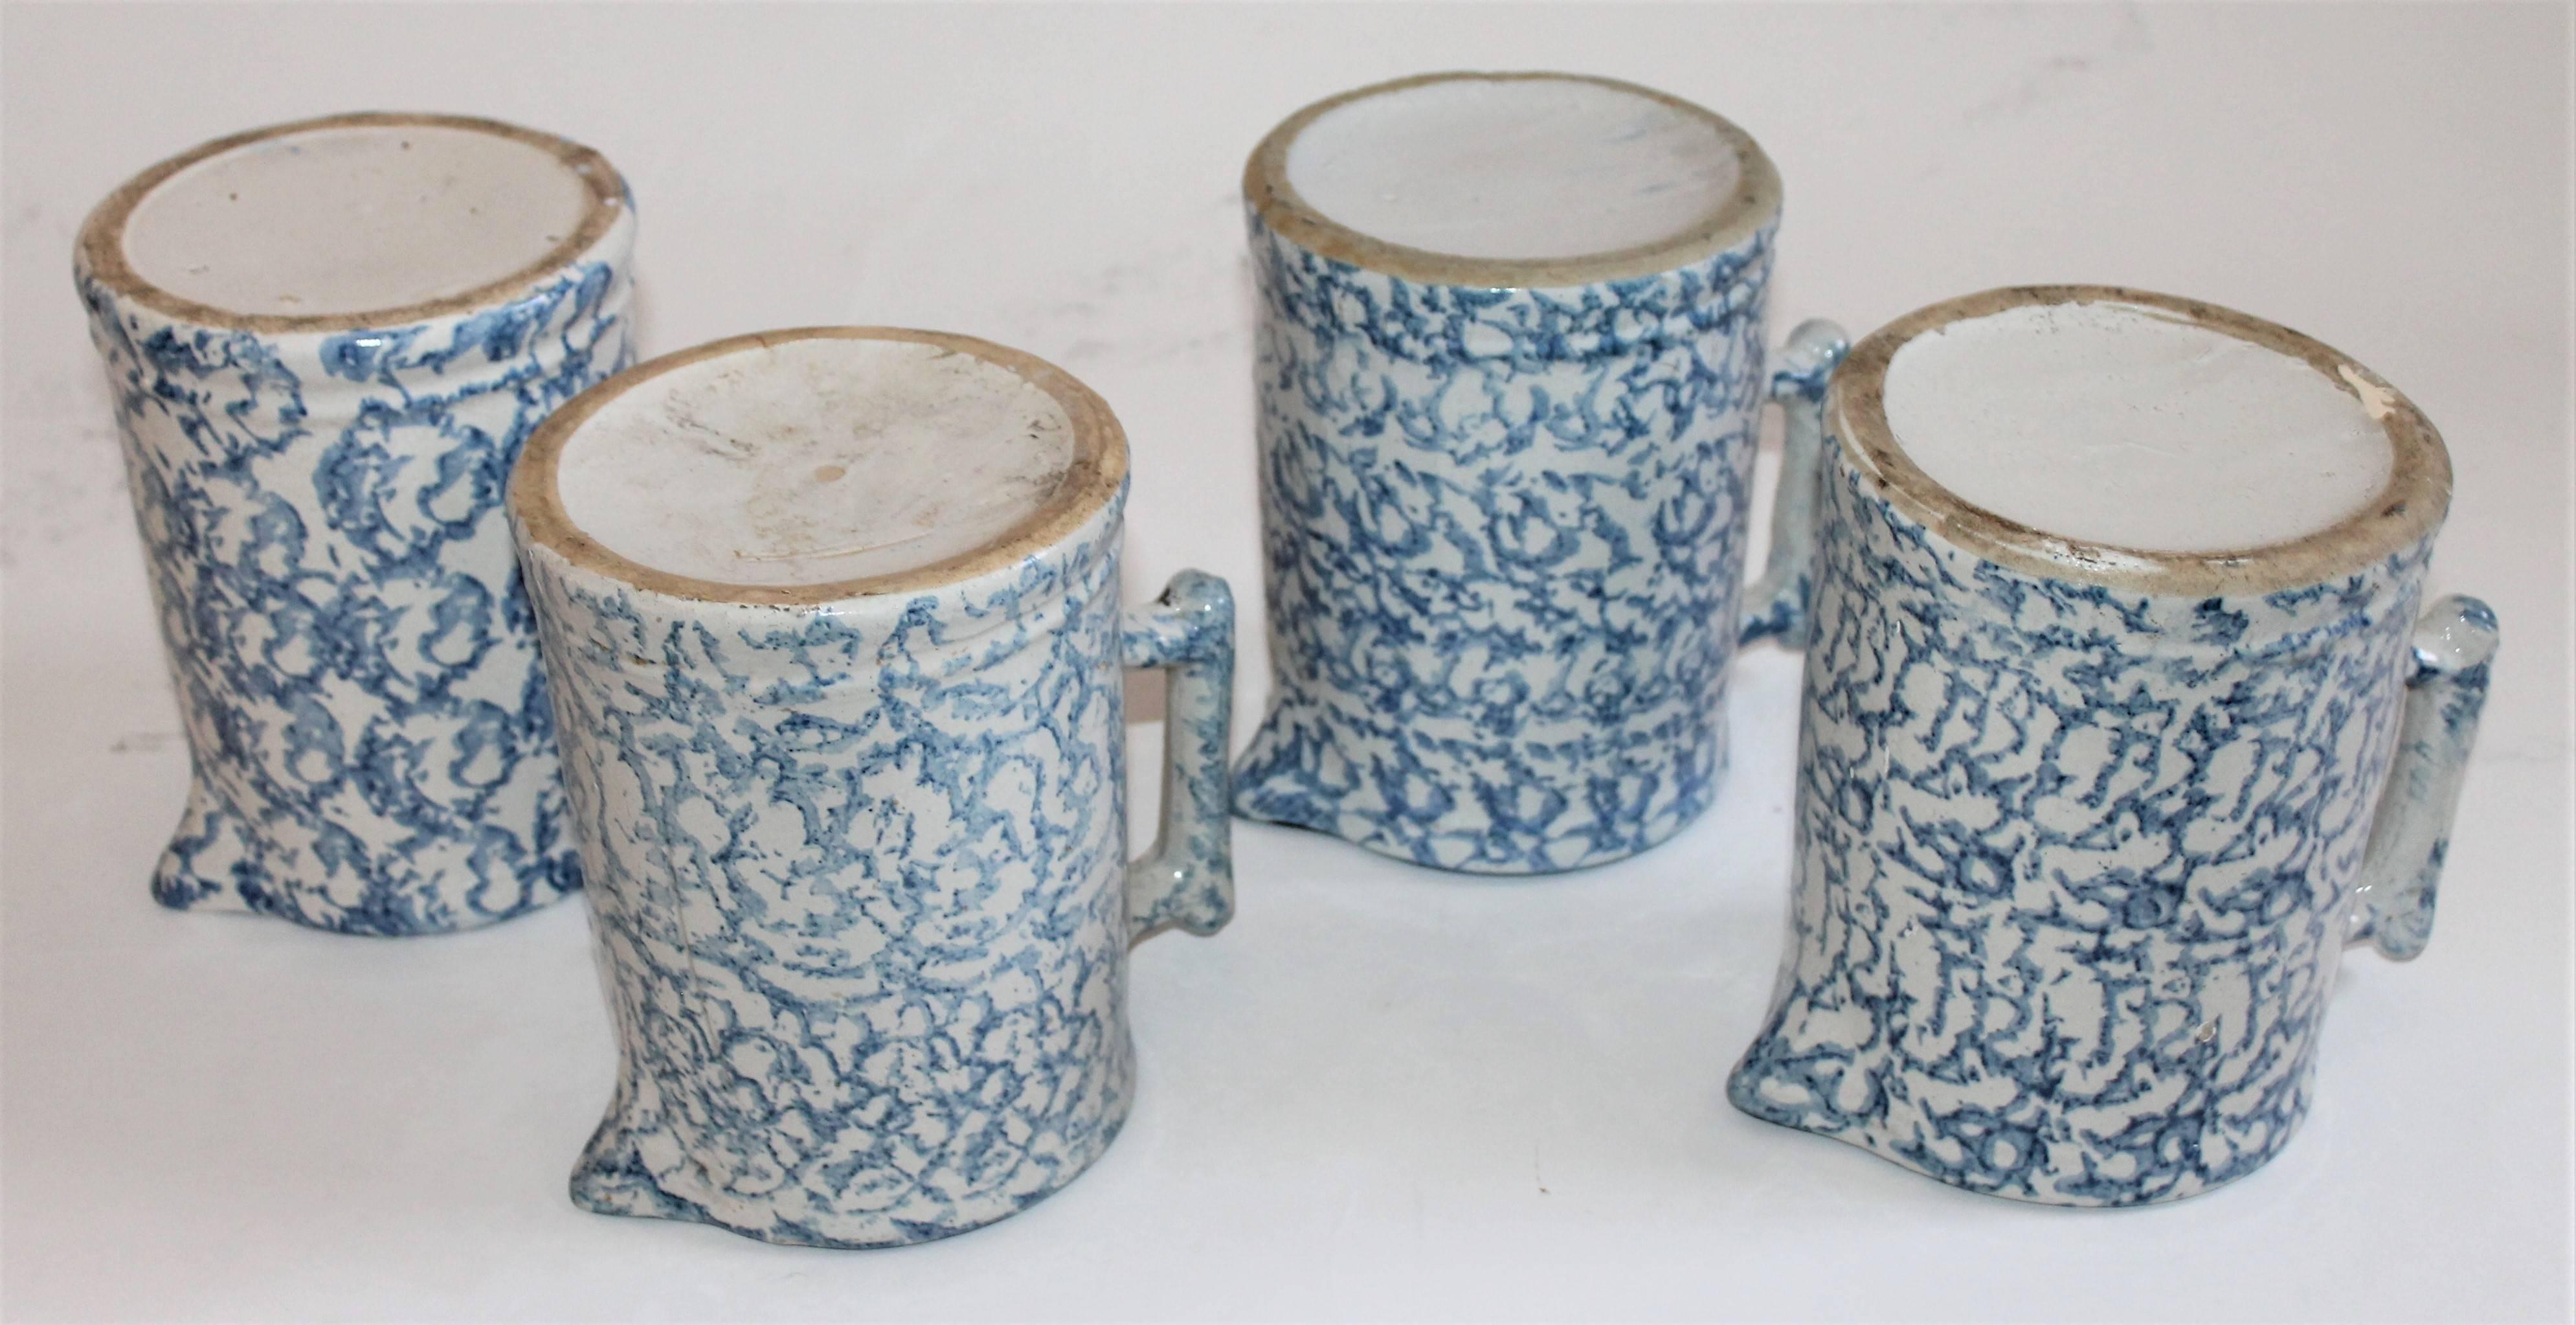 American Collection of Four 19th Century Sponge Ware Milk Pitcher